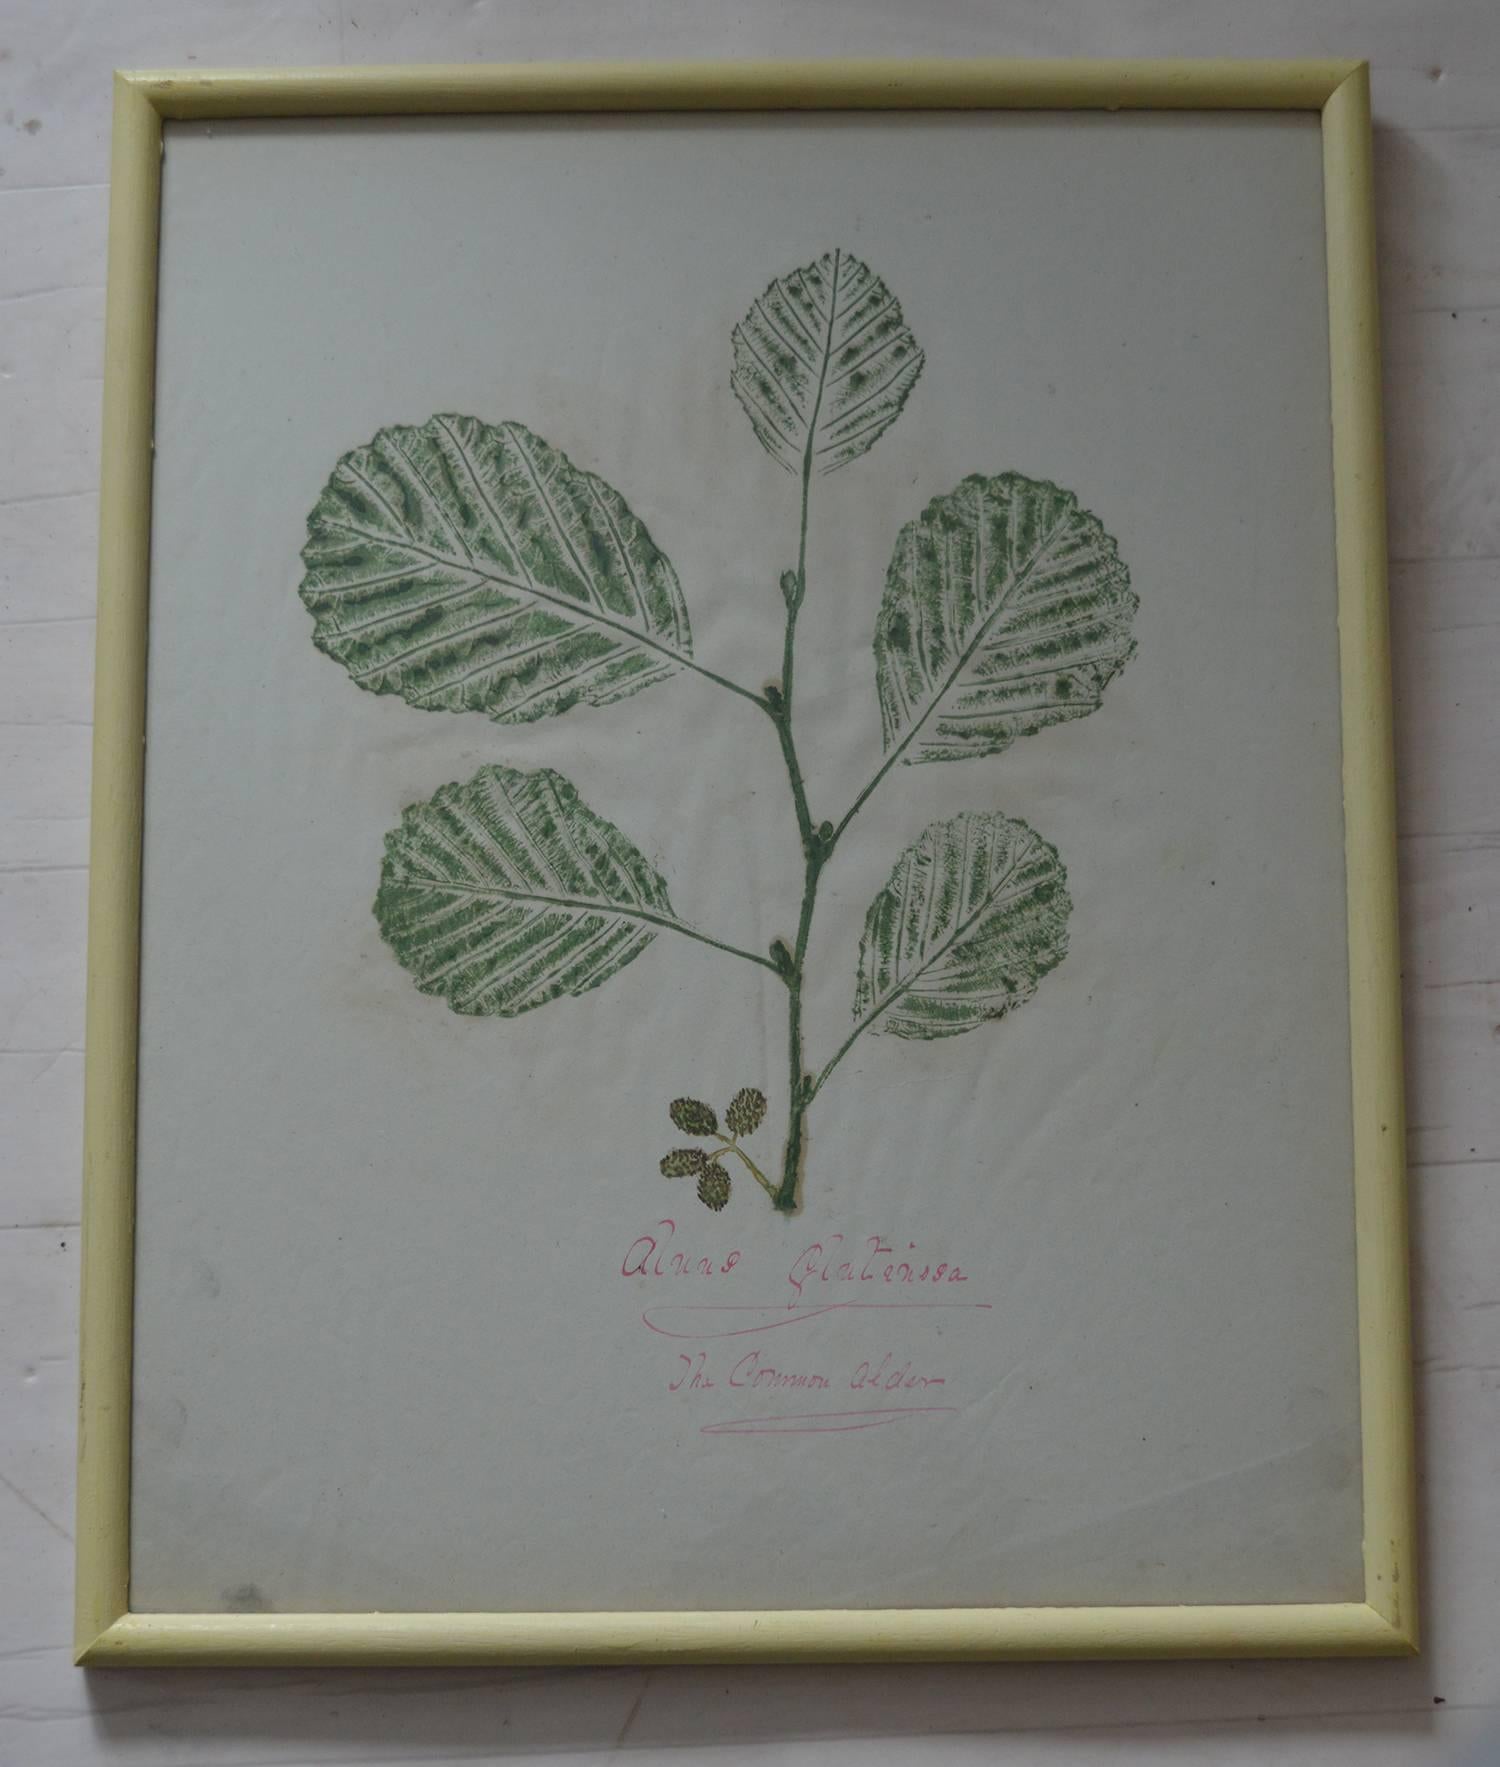 Six beautiful studies of leaves using amazing colors.

Stone lithographs with original color.

On very fine paper.

Original hand written inscription below each image.

Presented in faux ivory painted wood frames.
 